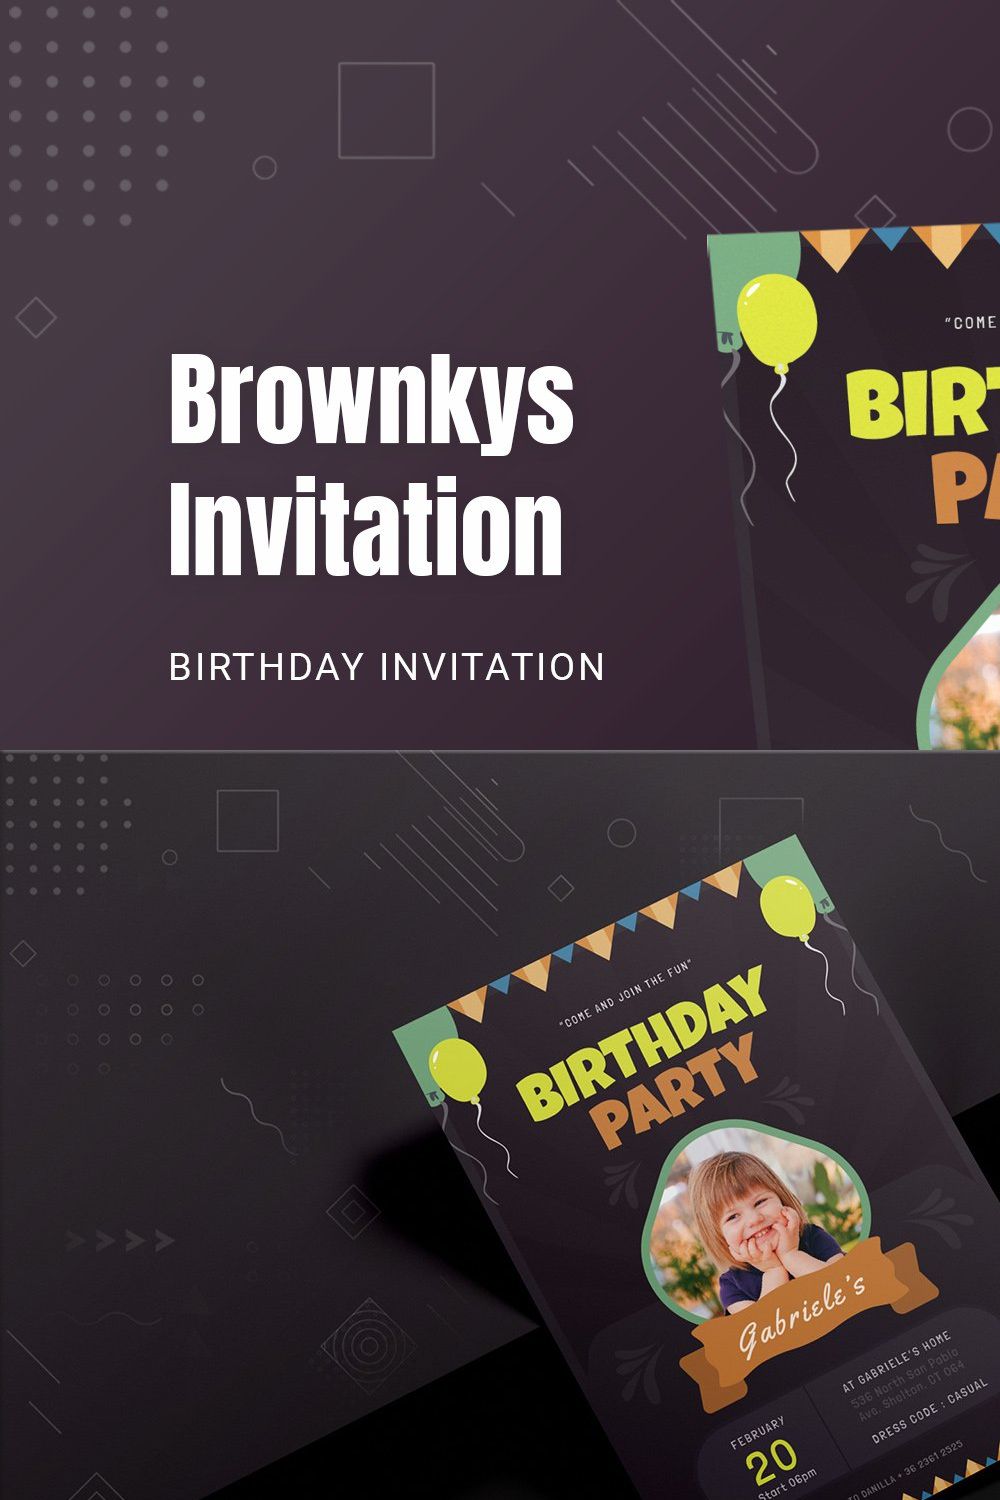 Brownkys Birthday Invitation pinterest preview image.